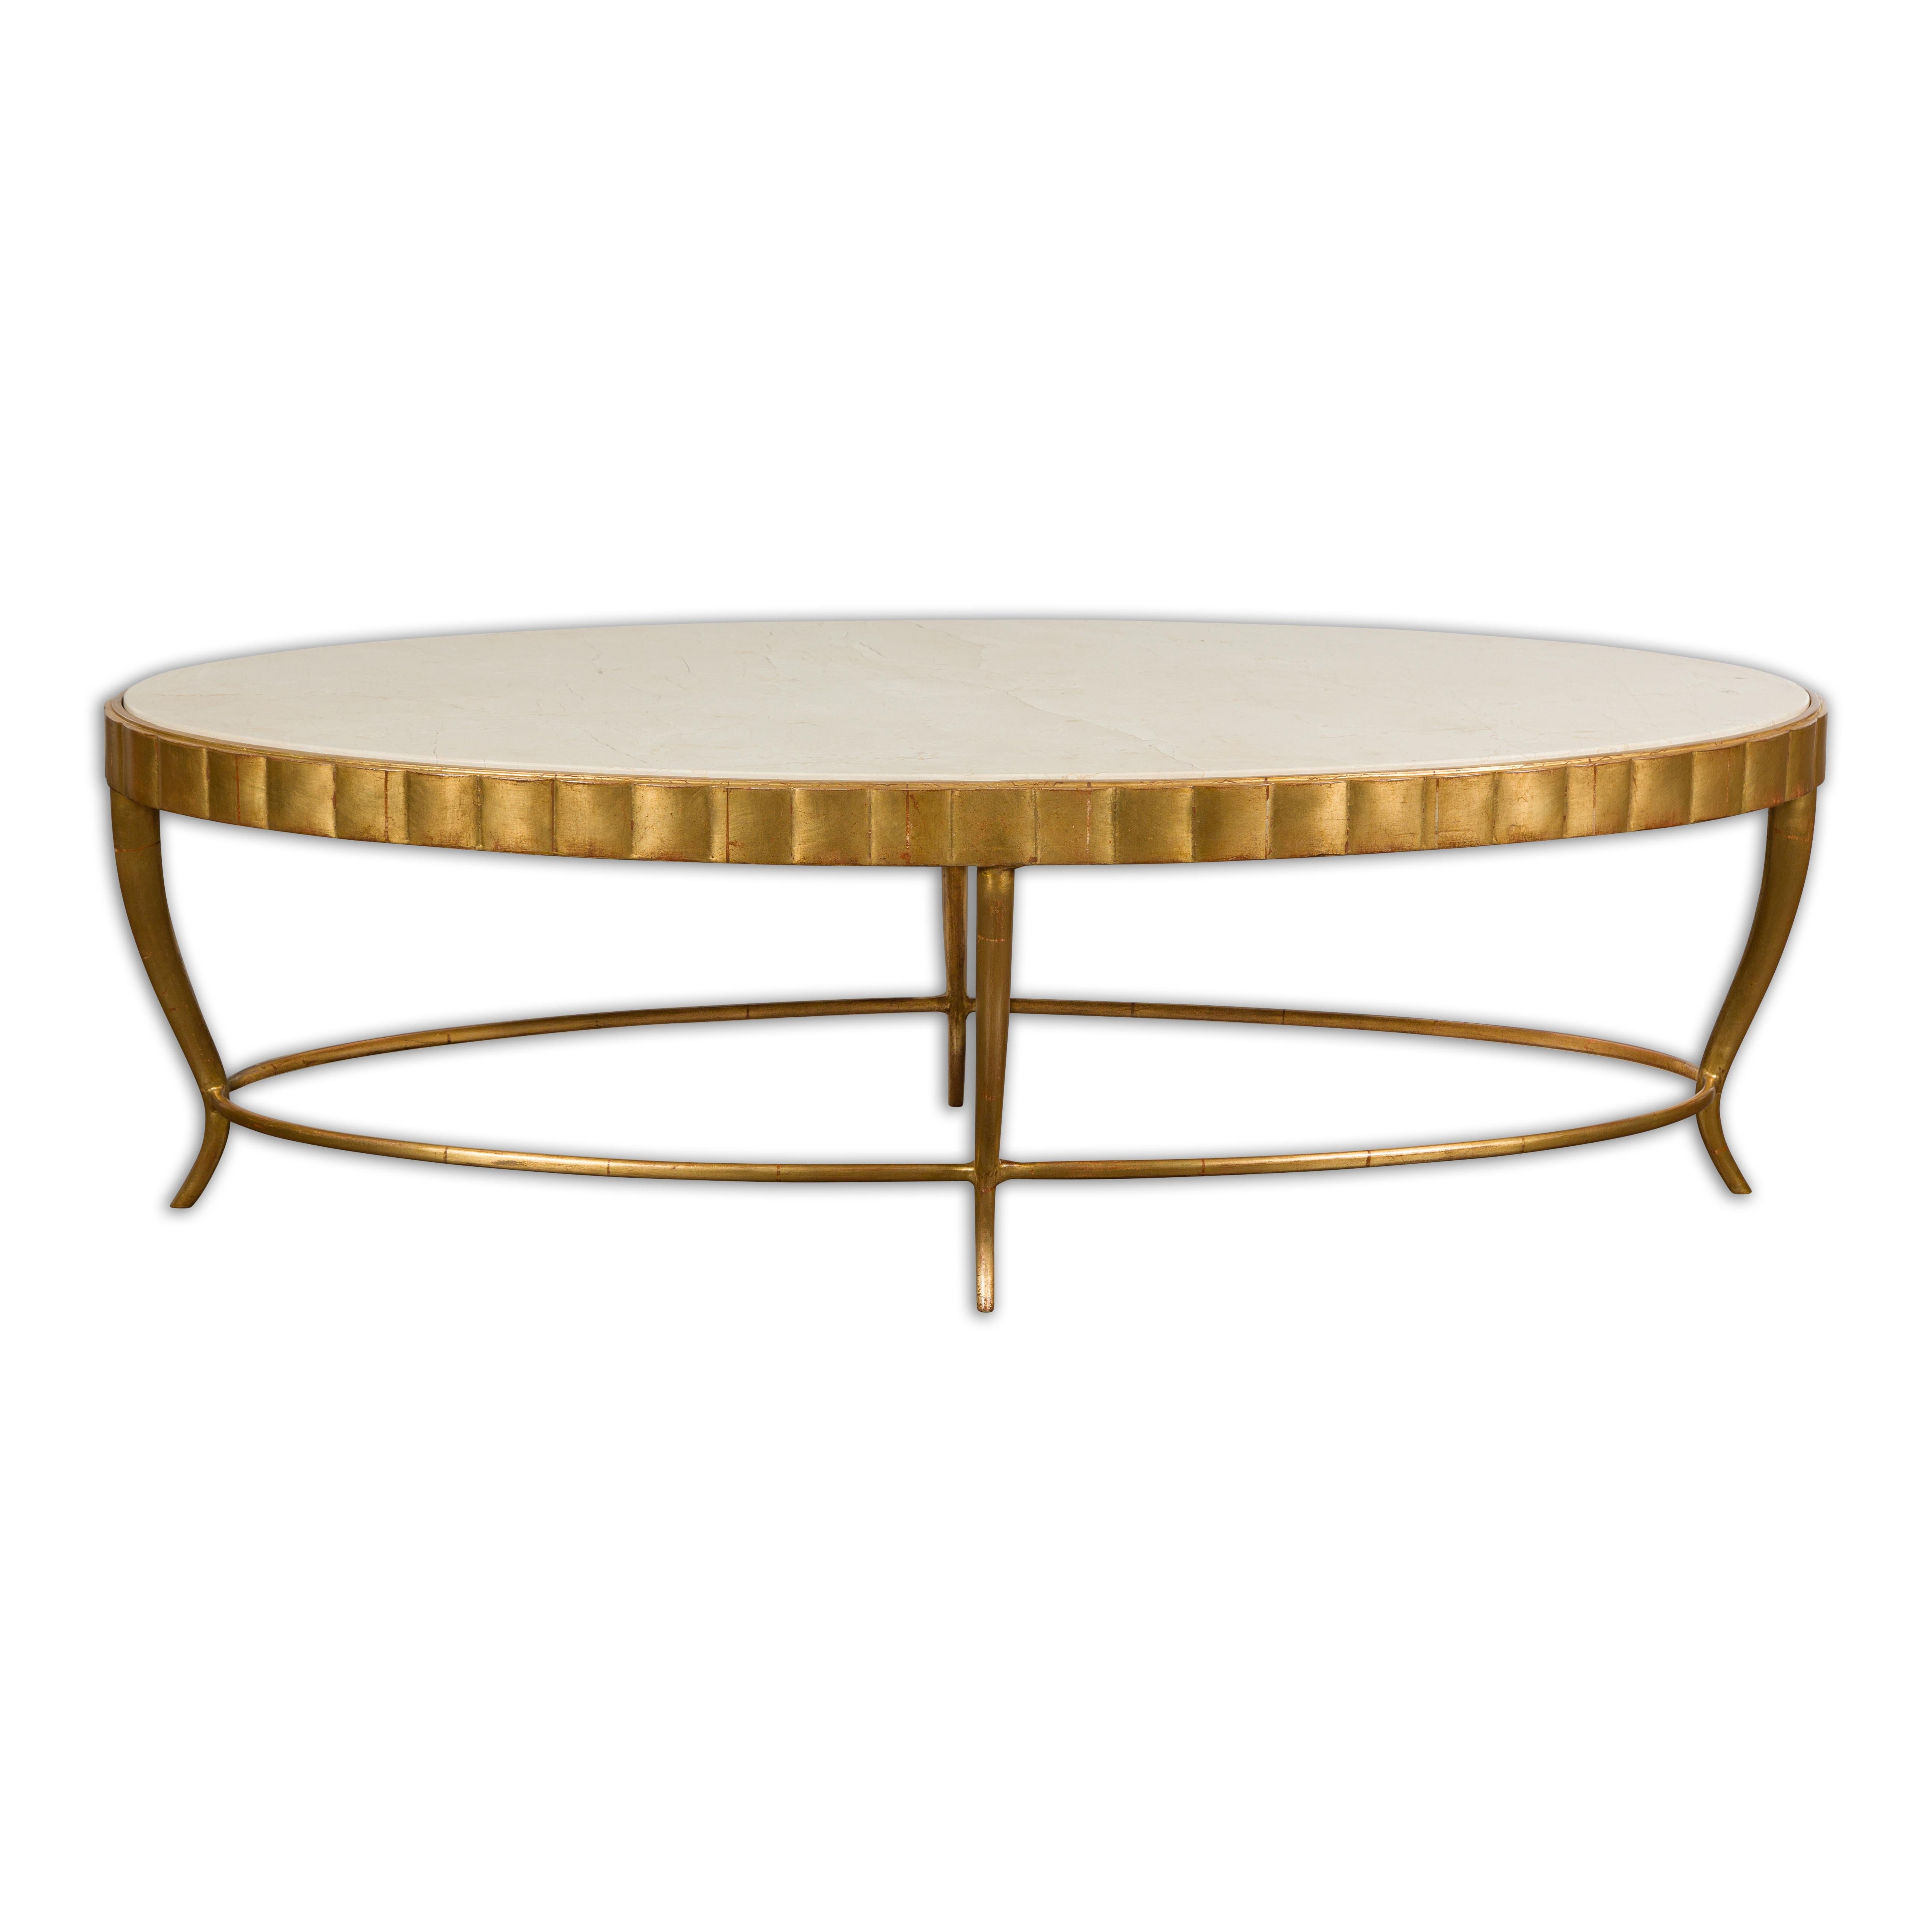 Italian Midcentury Gilt Metal Coffee Table with Oval Cream Marble Top 11